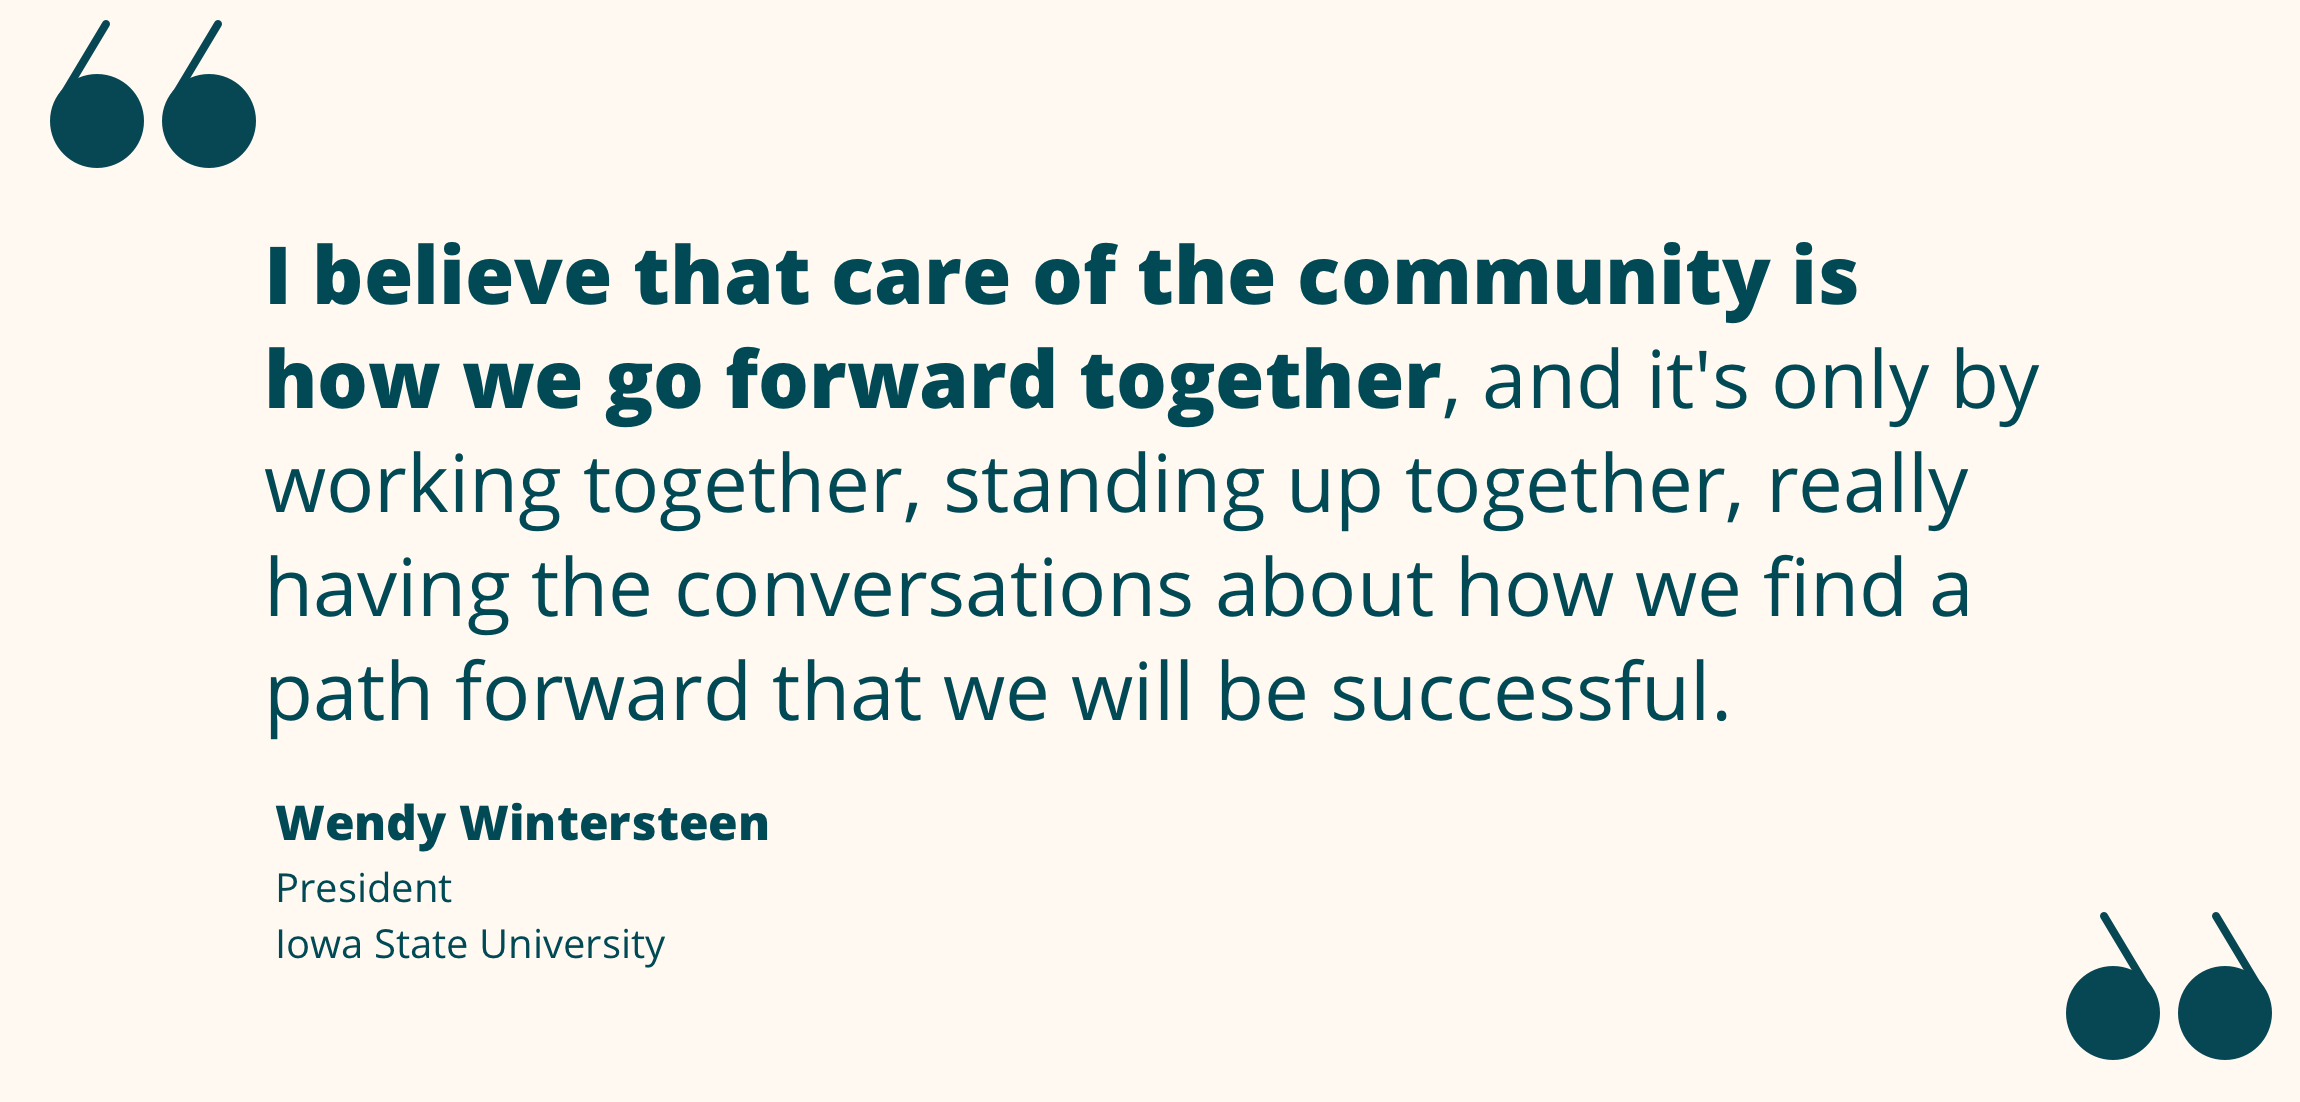 Quote from Wendy Wintersteen re moving forward as a community by working together, standing together, and conversation.